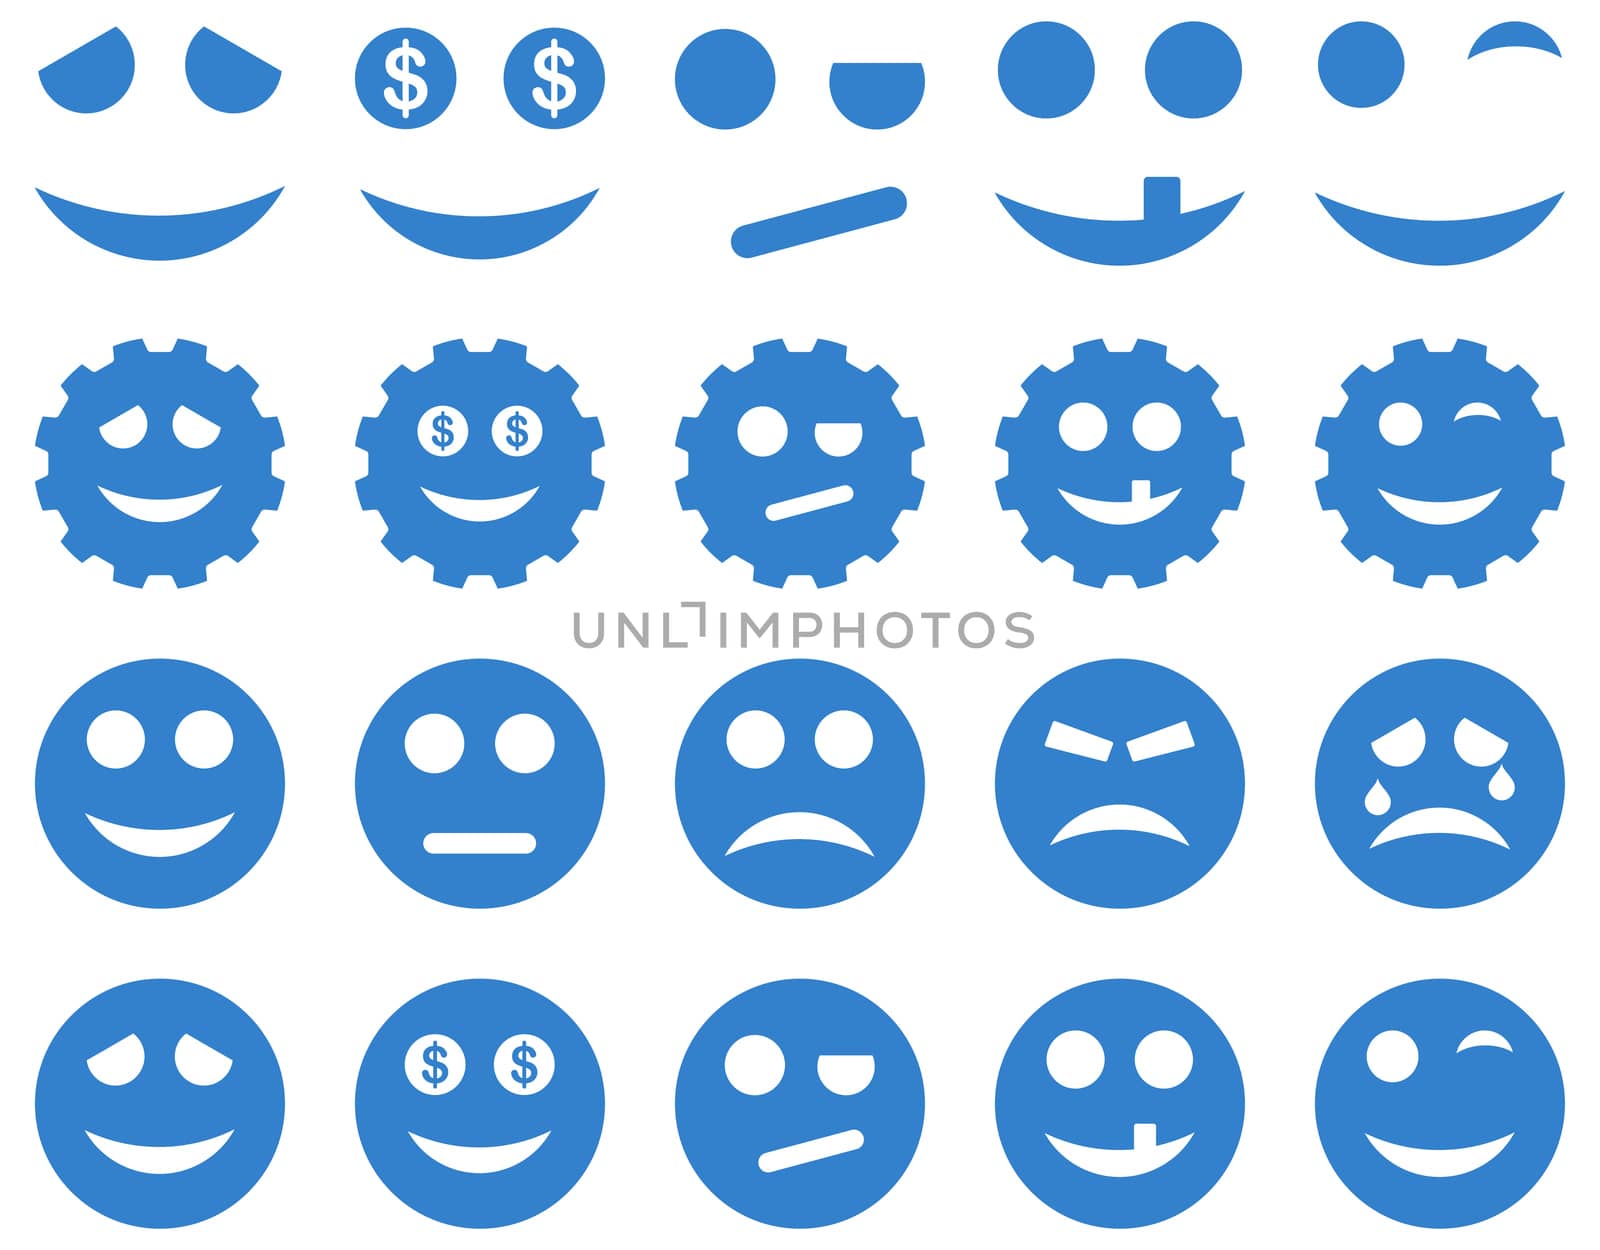 Tools, gears, smiles, emoticons icons. Glyph set style is flat images, cobalt symbols, isolated on a white background.